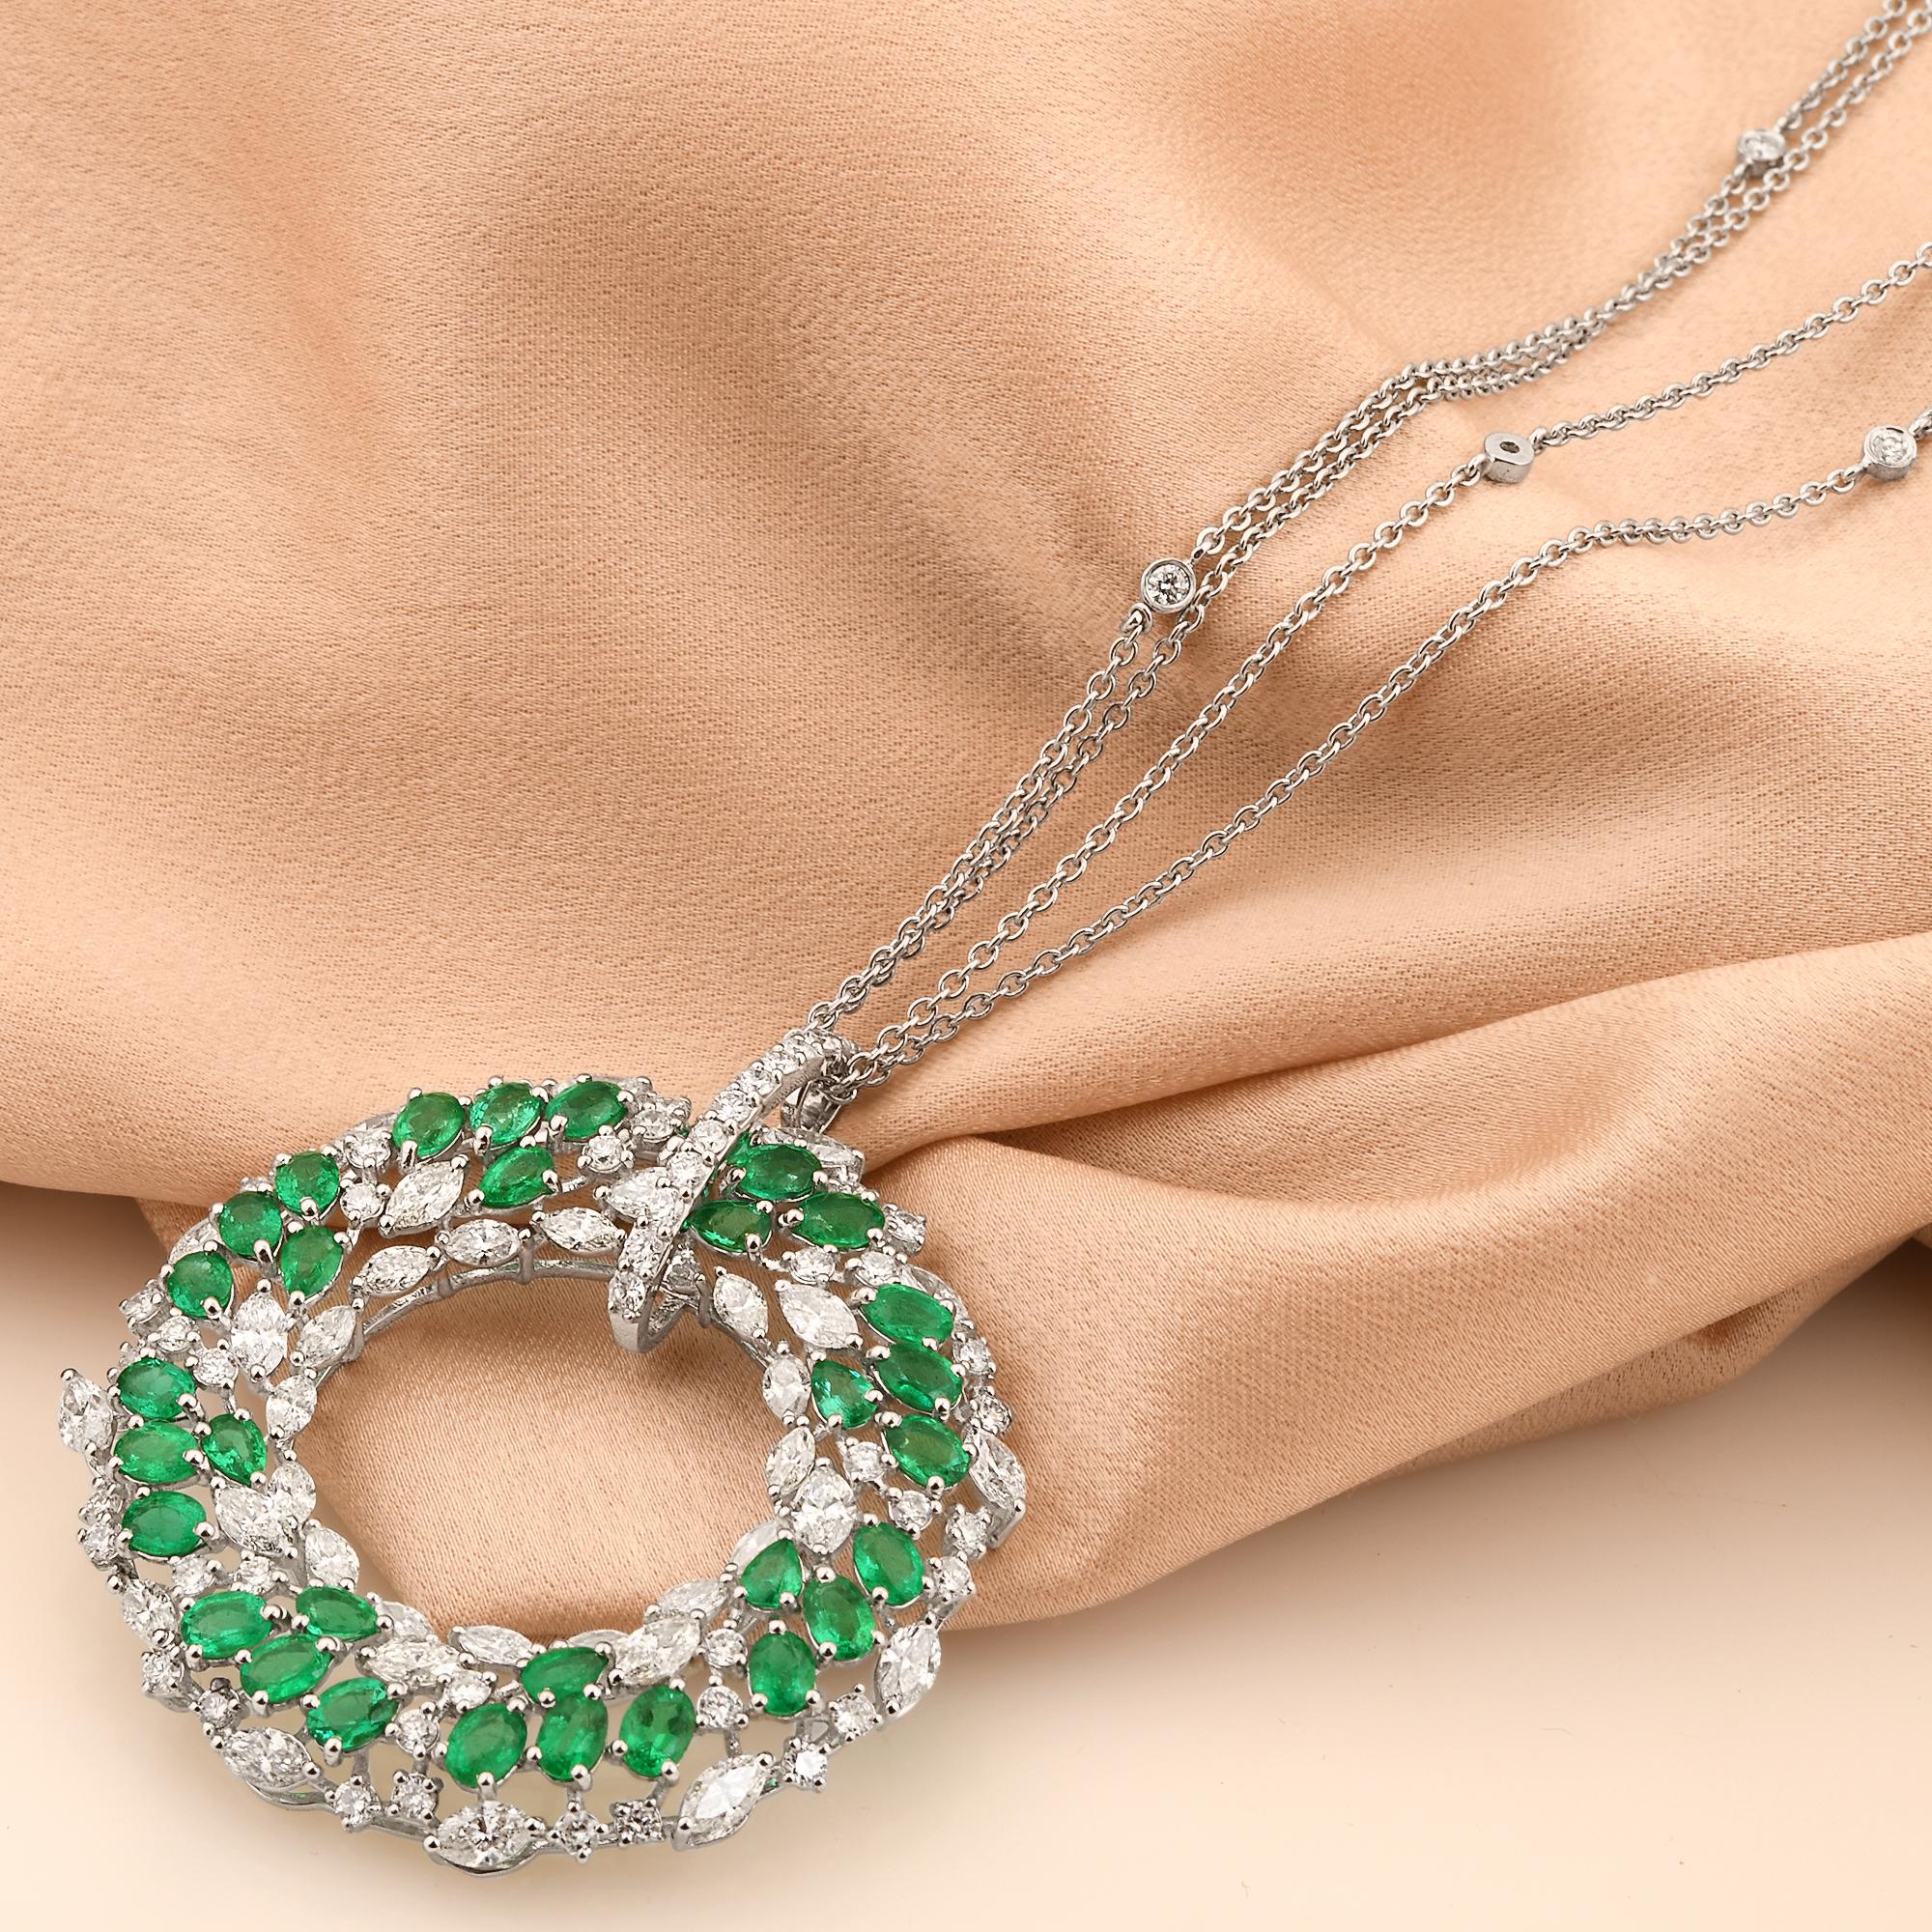 Introducing our exquisite natural emerald circle pendant diamond necklace, a stunning piece of fine jewelry meticulously crafted in 14 karat white gold. This necklace showcases the timeless allure of emeralds and the brilliance of diamonds,